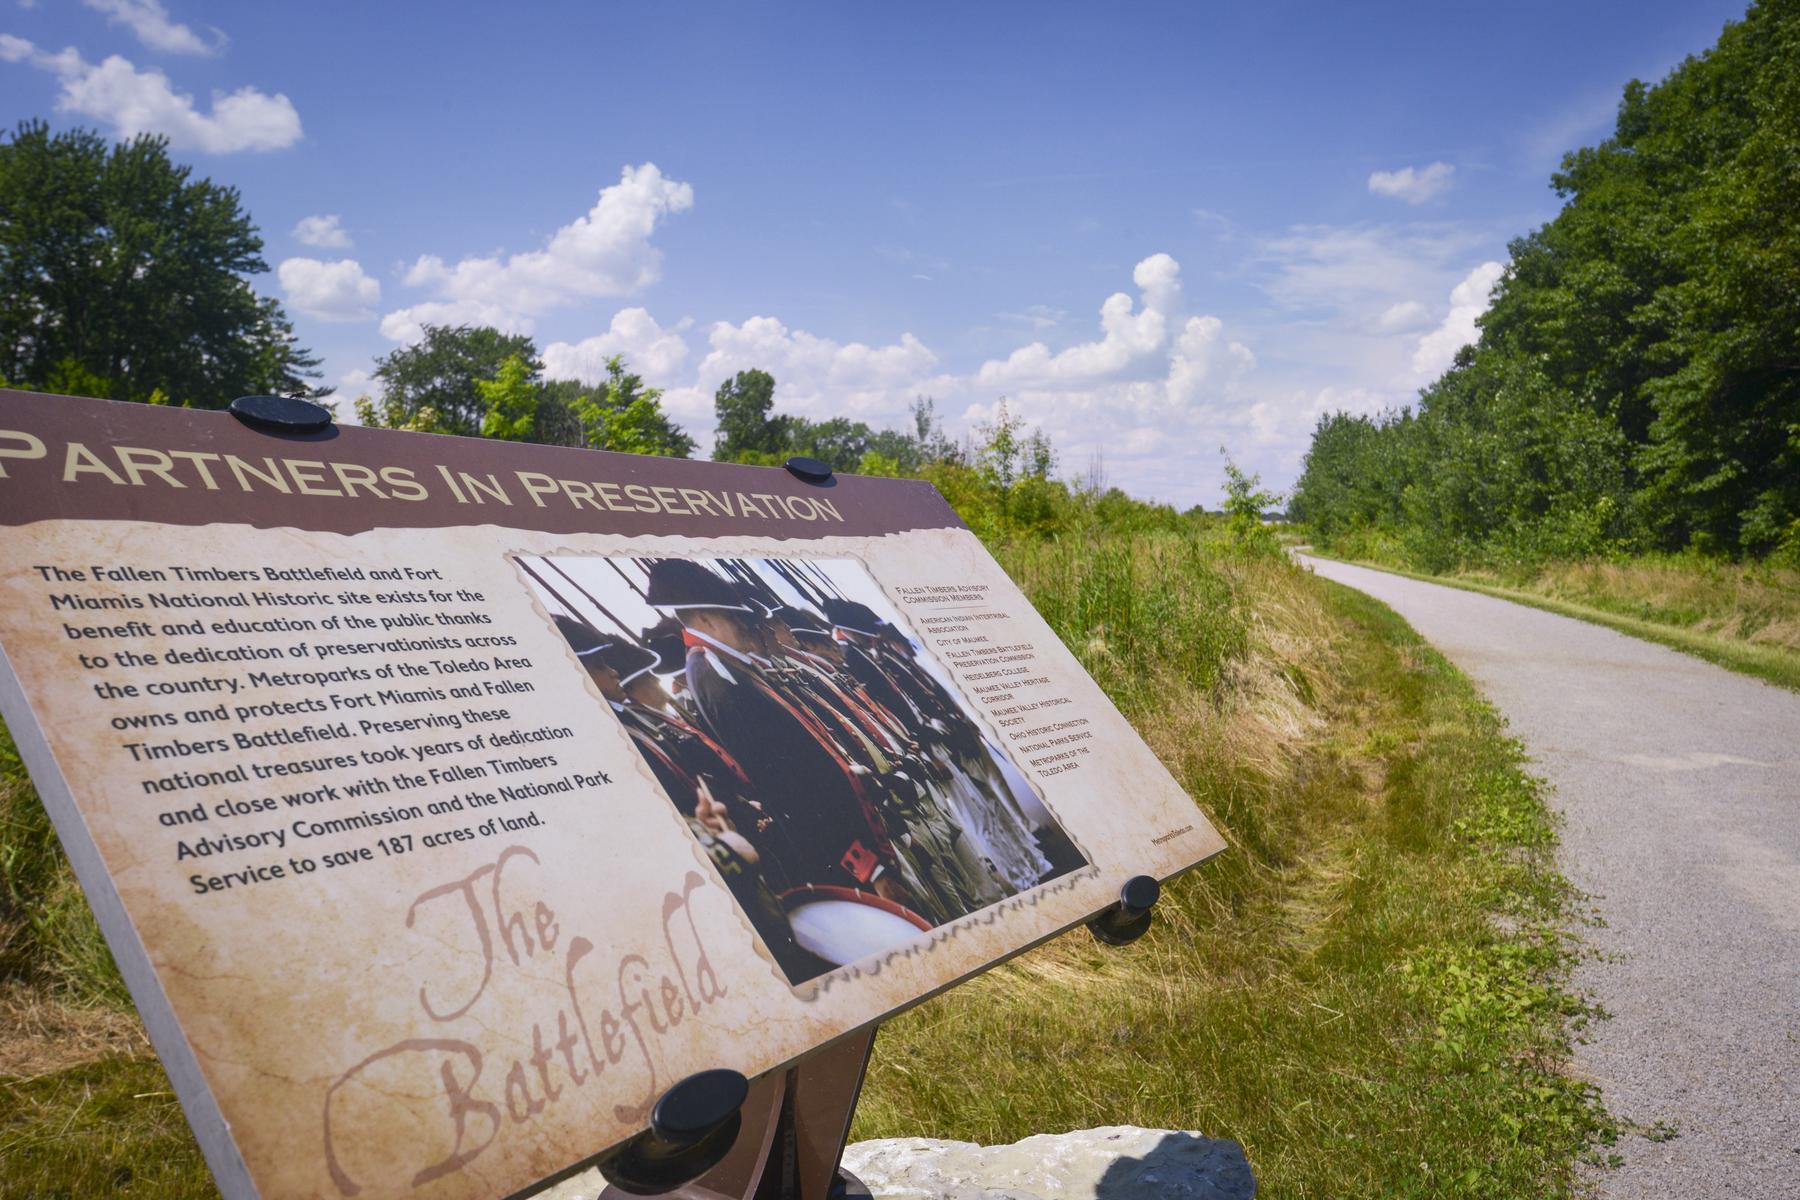 Fallen Timbers Battlefield and Visitors Center EDGE Landscape